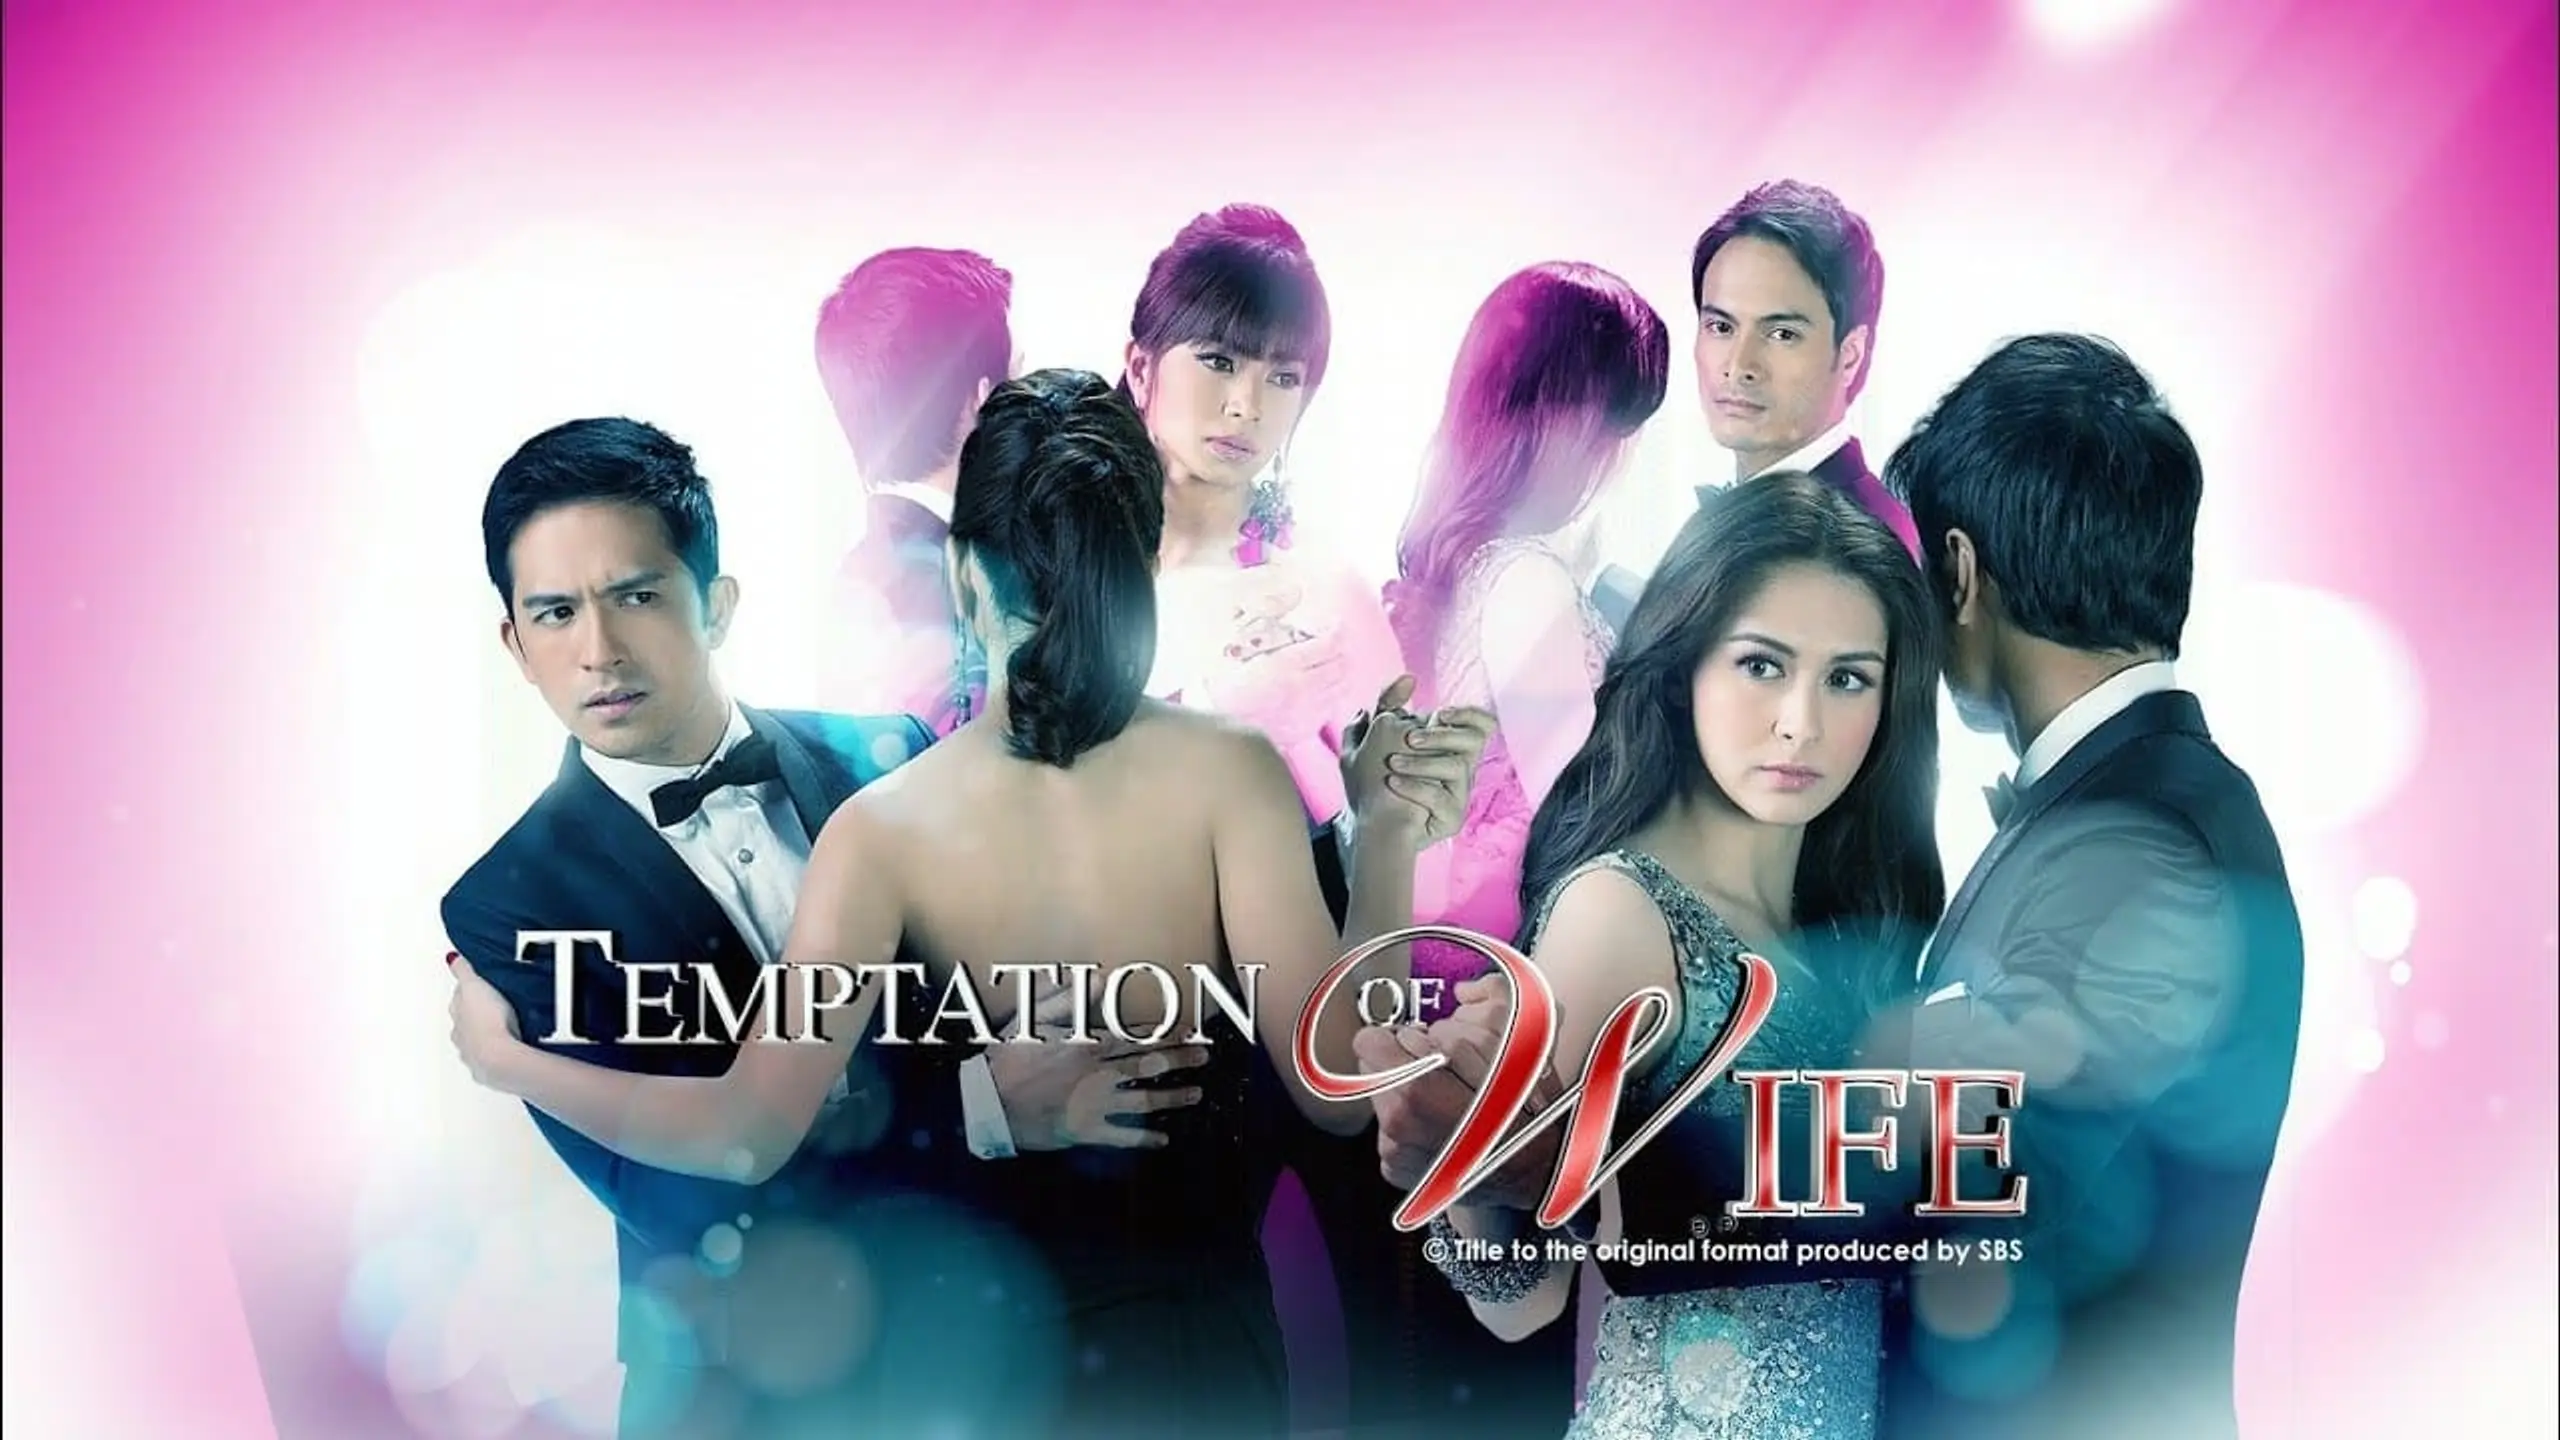 Temptation of Wife